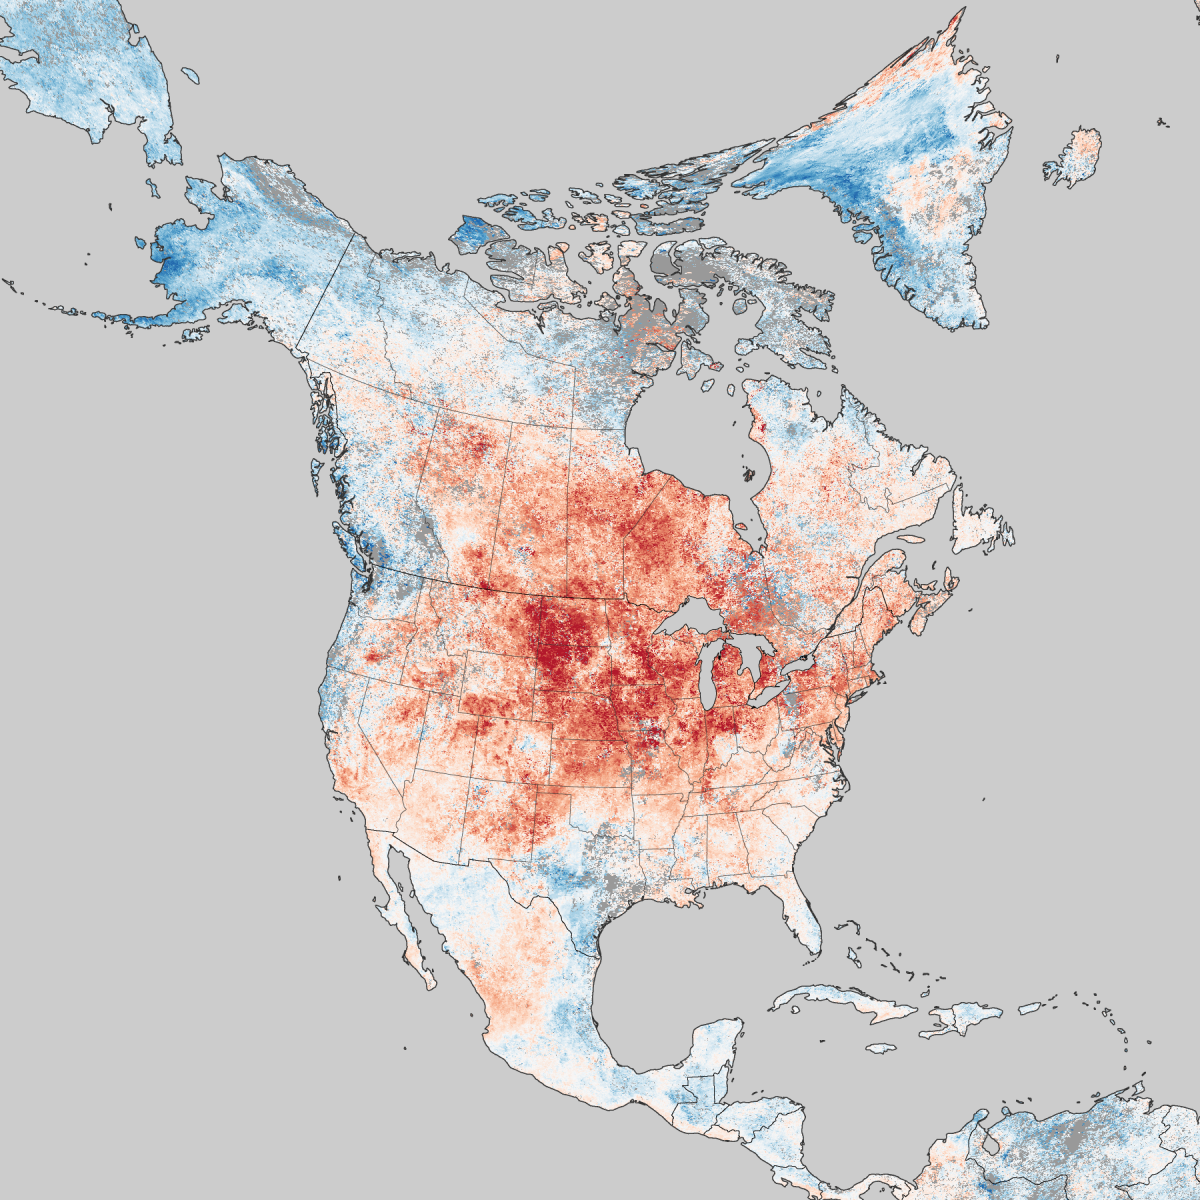 March 2012 heatwave.  Image courtesy NASA Earth Observatory & Wikimedia Commons.